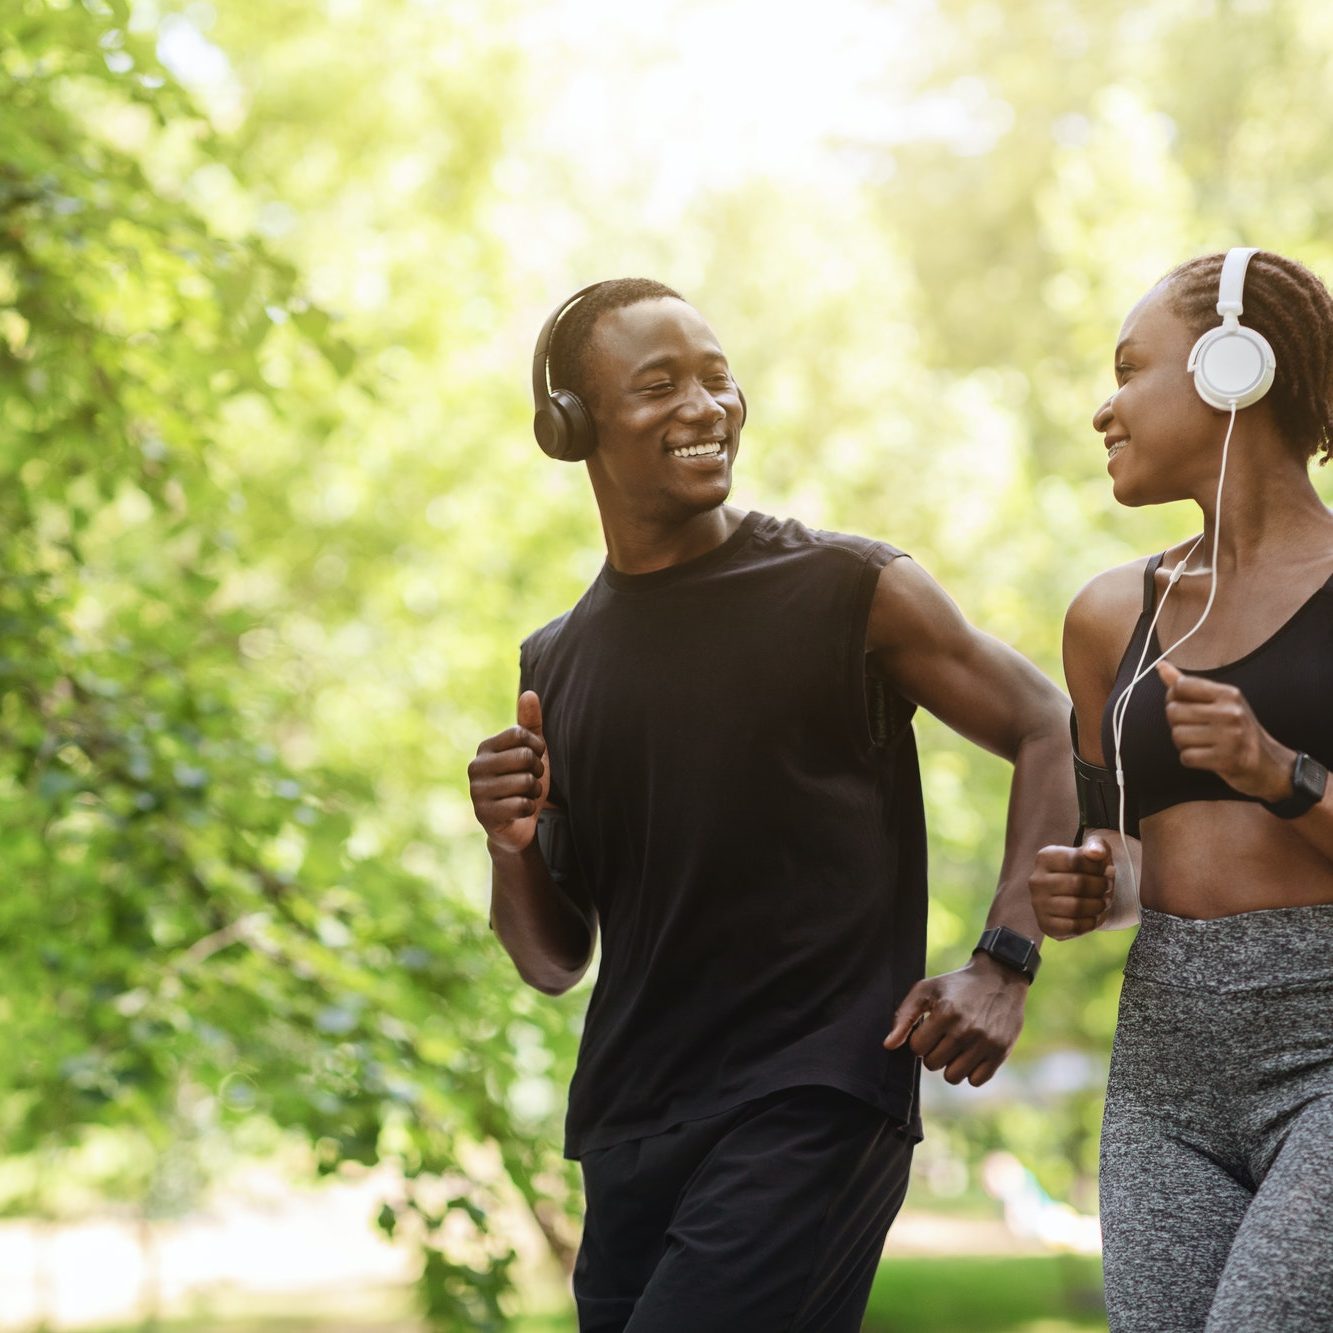 Couples Active Leisure. Happy Black Guy And Girl Jogging Together Outdoors